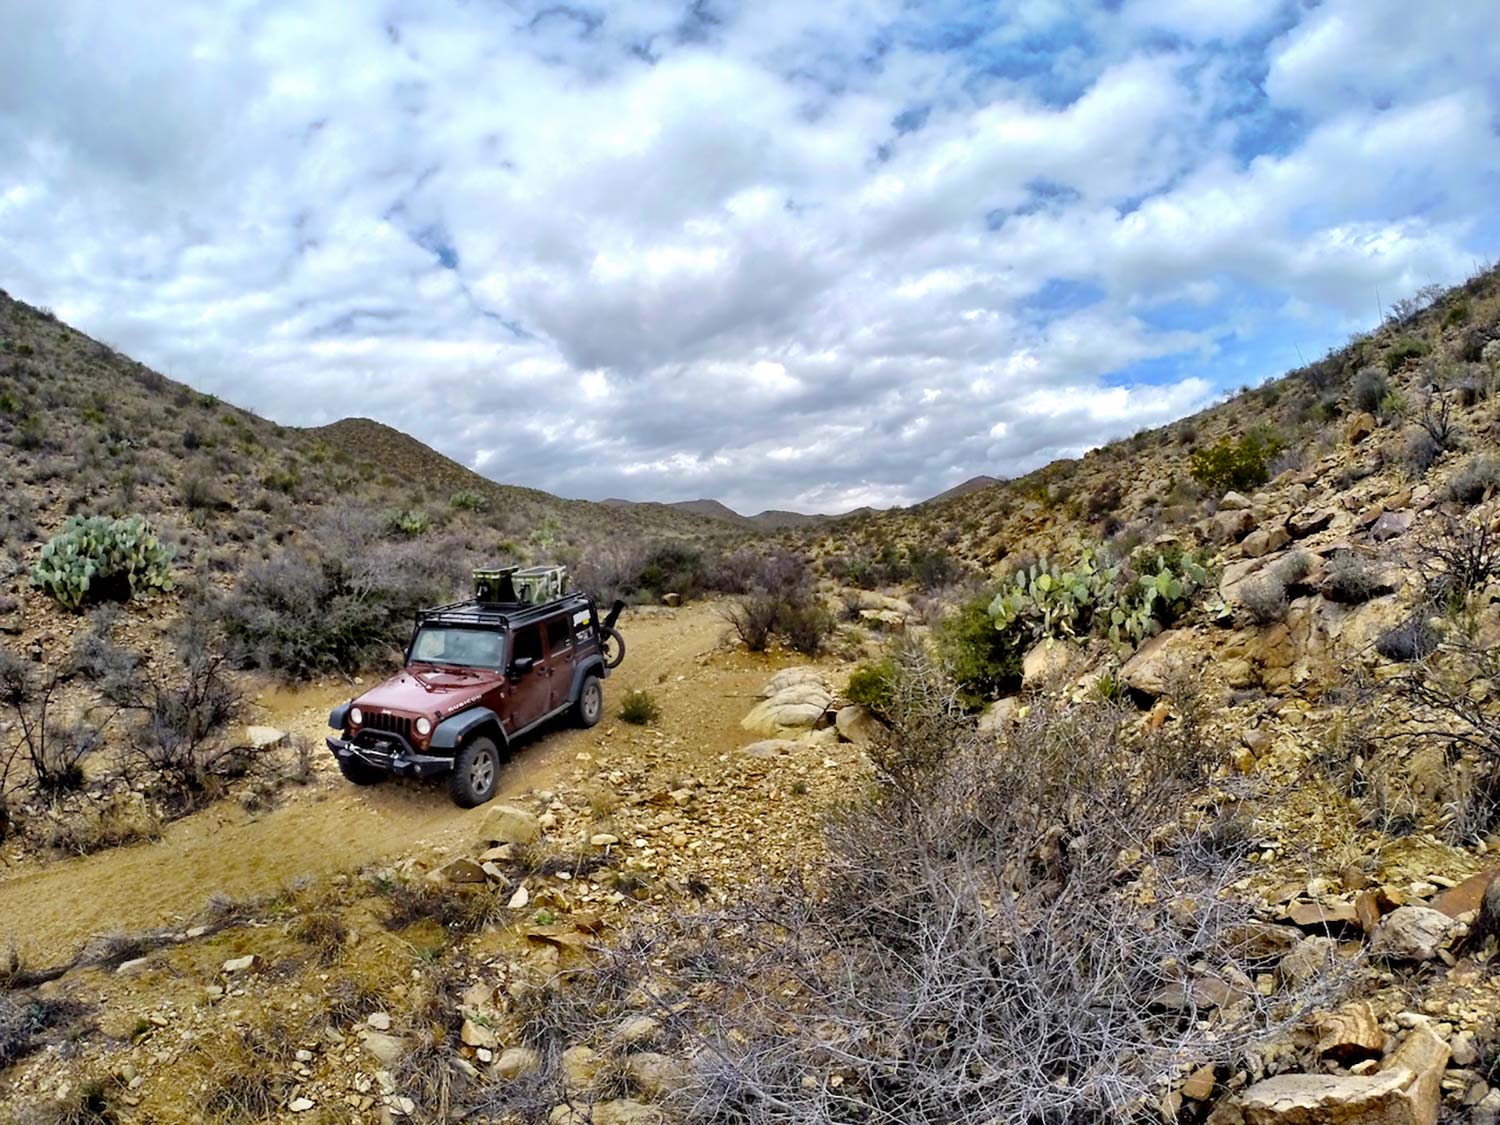 A Jeep Wrangler Rubicon in red drives through an overland hunting trail.